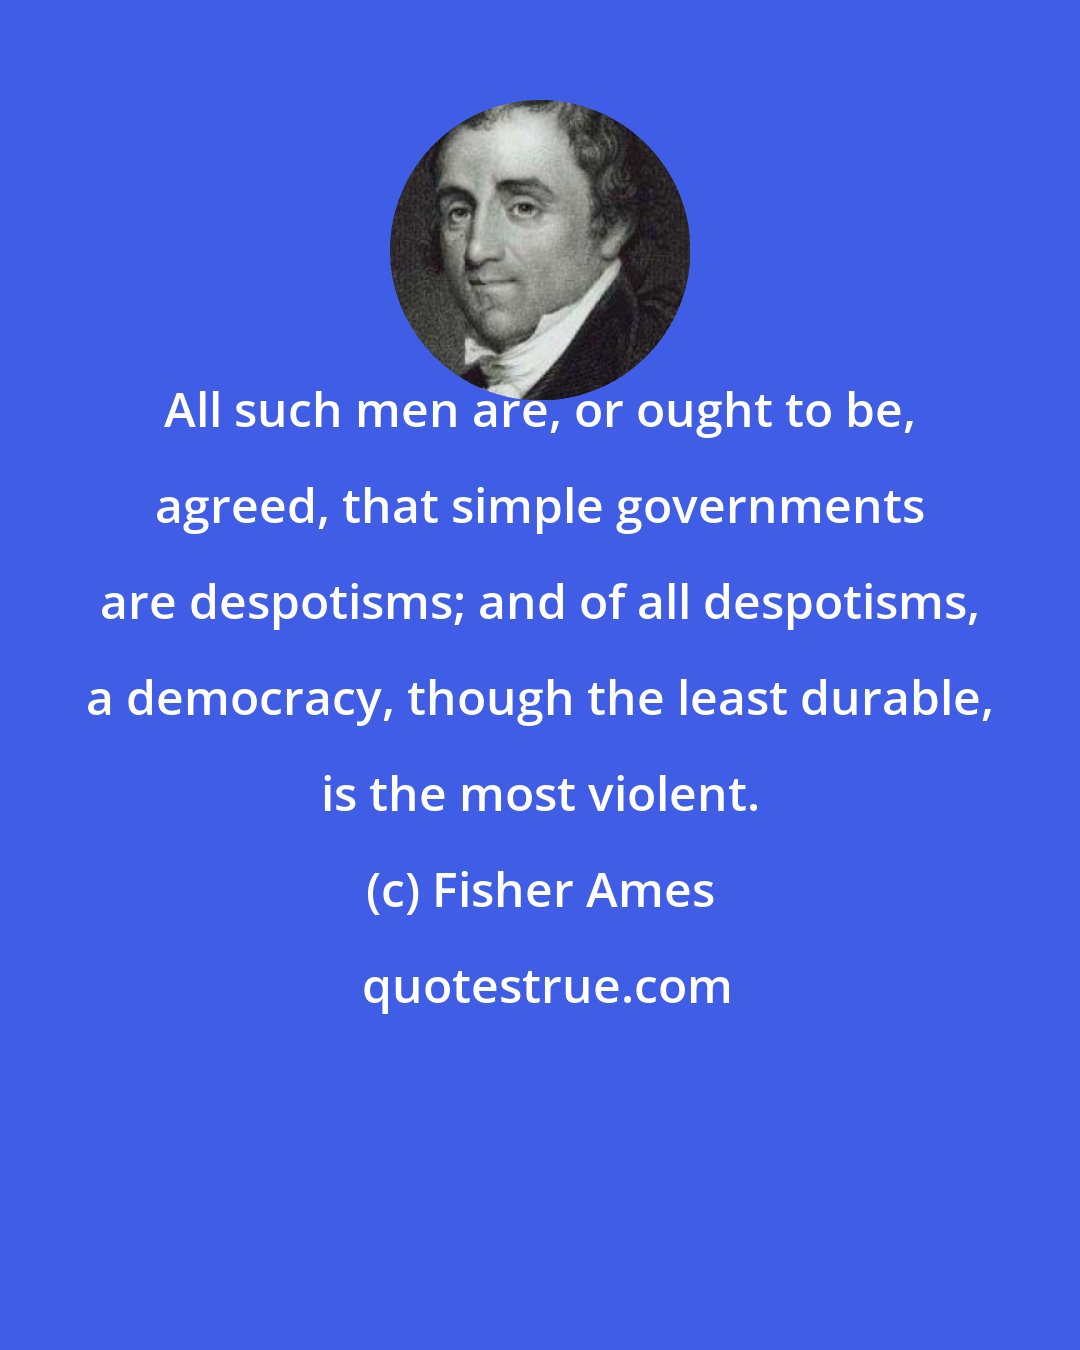 Fisher Ames: All such men are, or ought to be, agreed, that simple governments are despotisms; and of all despotisms, a democracy, though the least durable, is the most violent.